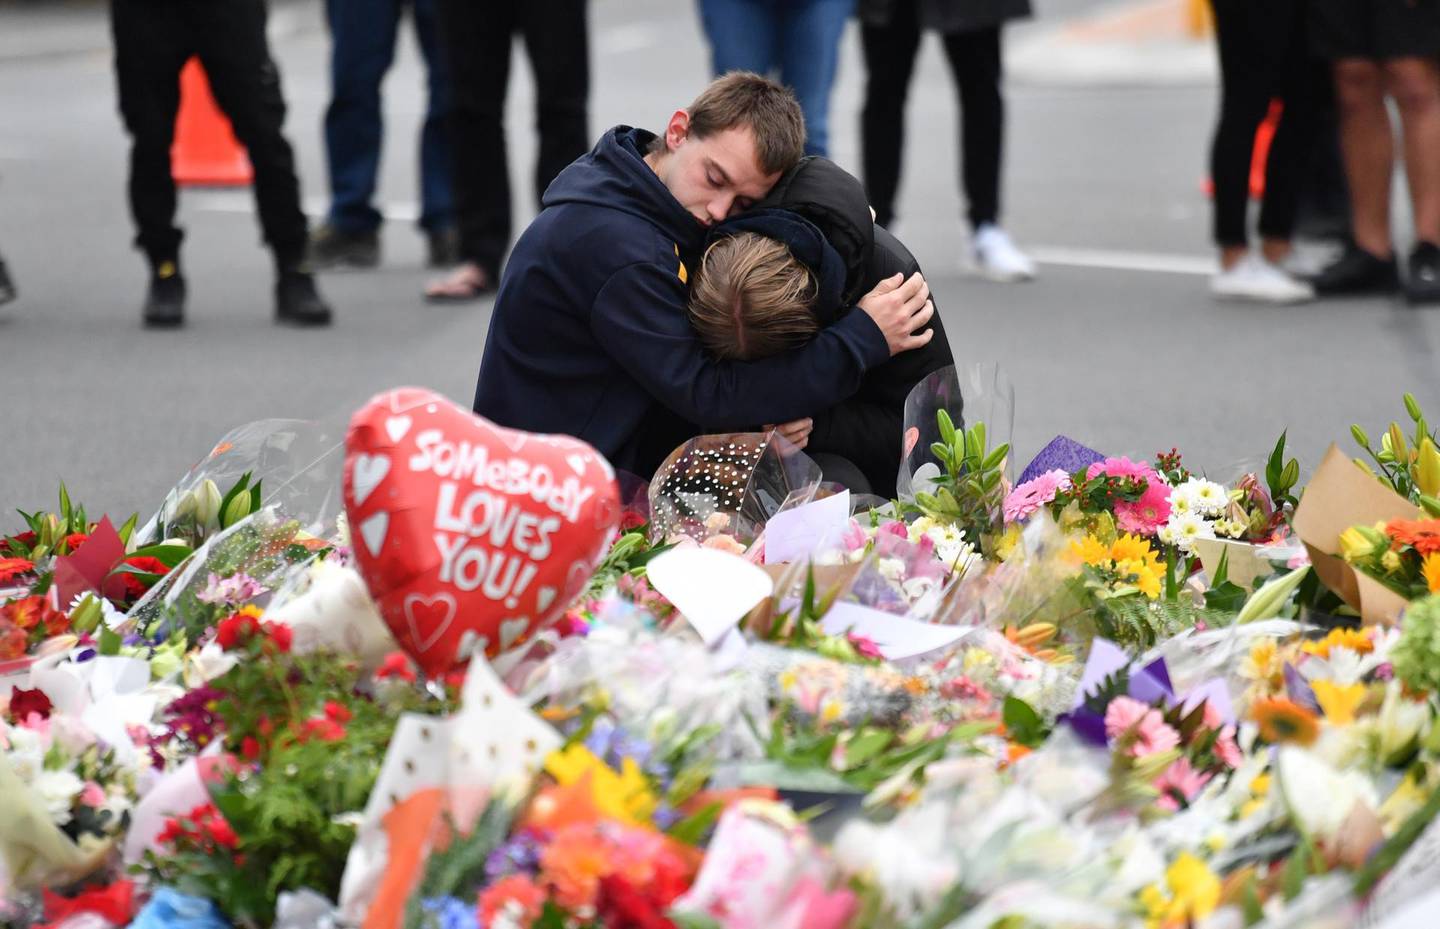 epaselect epa07441388 Members of the public mourn at a flower memorial near the Al Noor Masjid on Deans Rd in Christchurch, New Zealand, 16 March 2019. A gunman killed 49 worshippers at the Al Noor Masjid and Linwood Masjid on 15 March. The 28-year-old Australian suspect, Brenton Tarrant, appeared in court on 16 March and was charged with murder.  EPA/MICK TSIKAS  AUSTRALIA AND NEW ZEALAND OUT